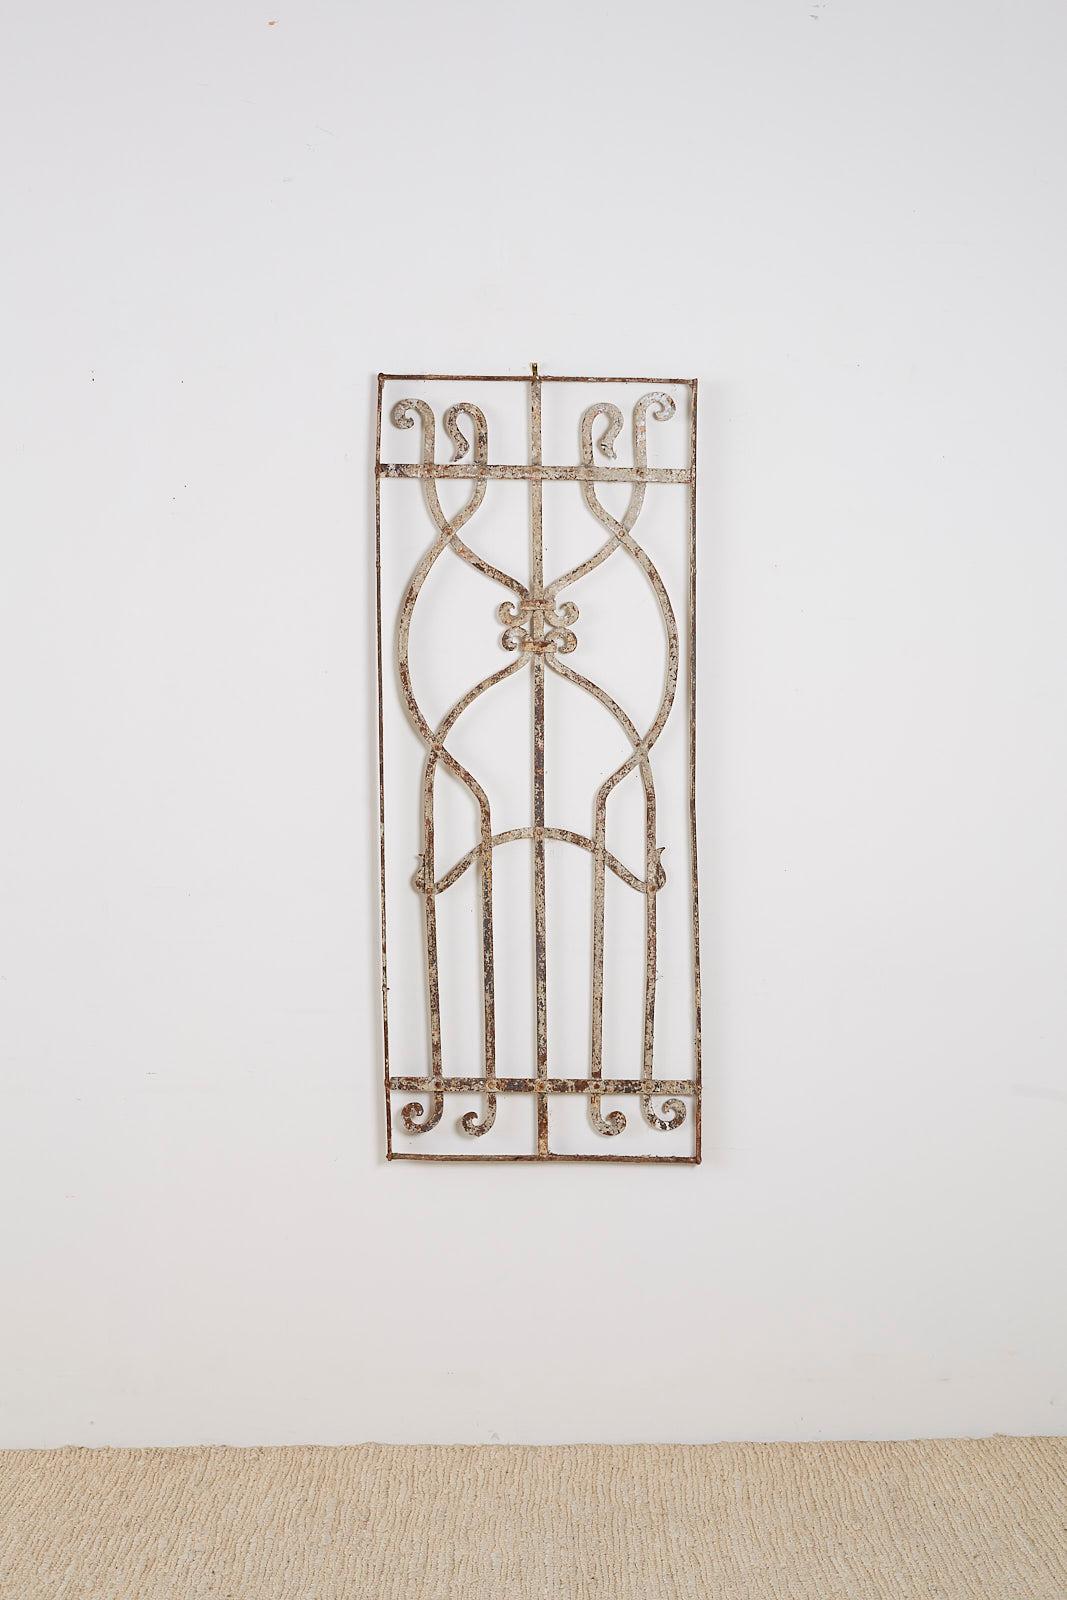 Painted Greek Style Architectural Iron Window Grill